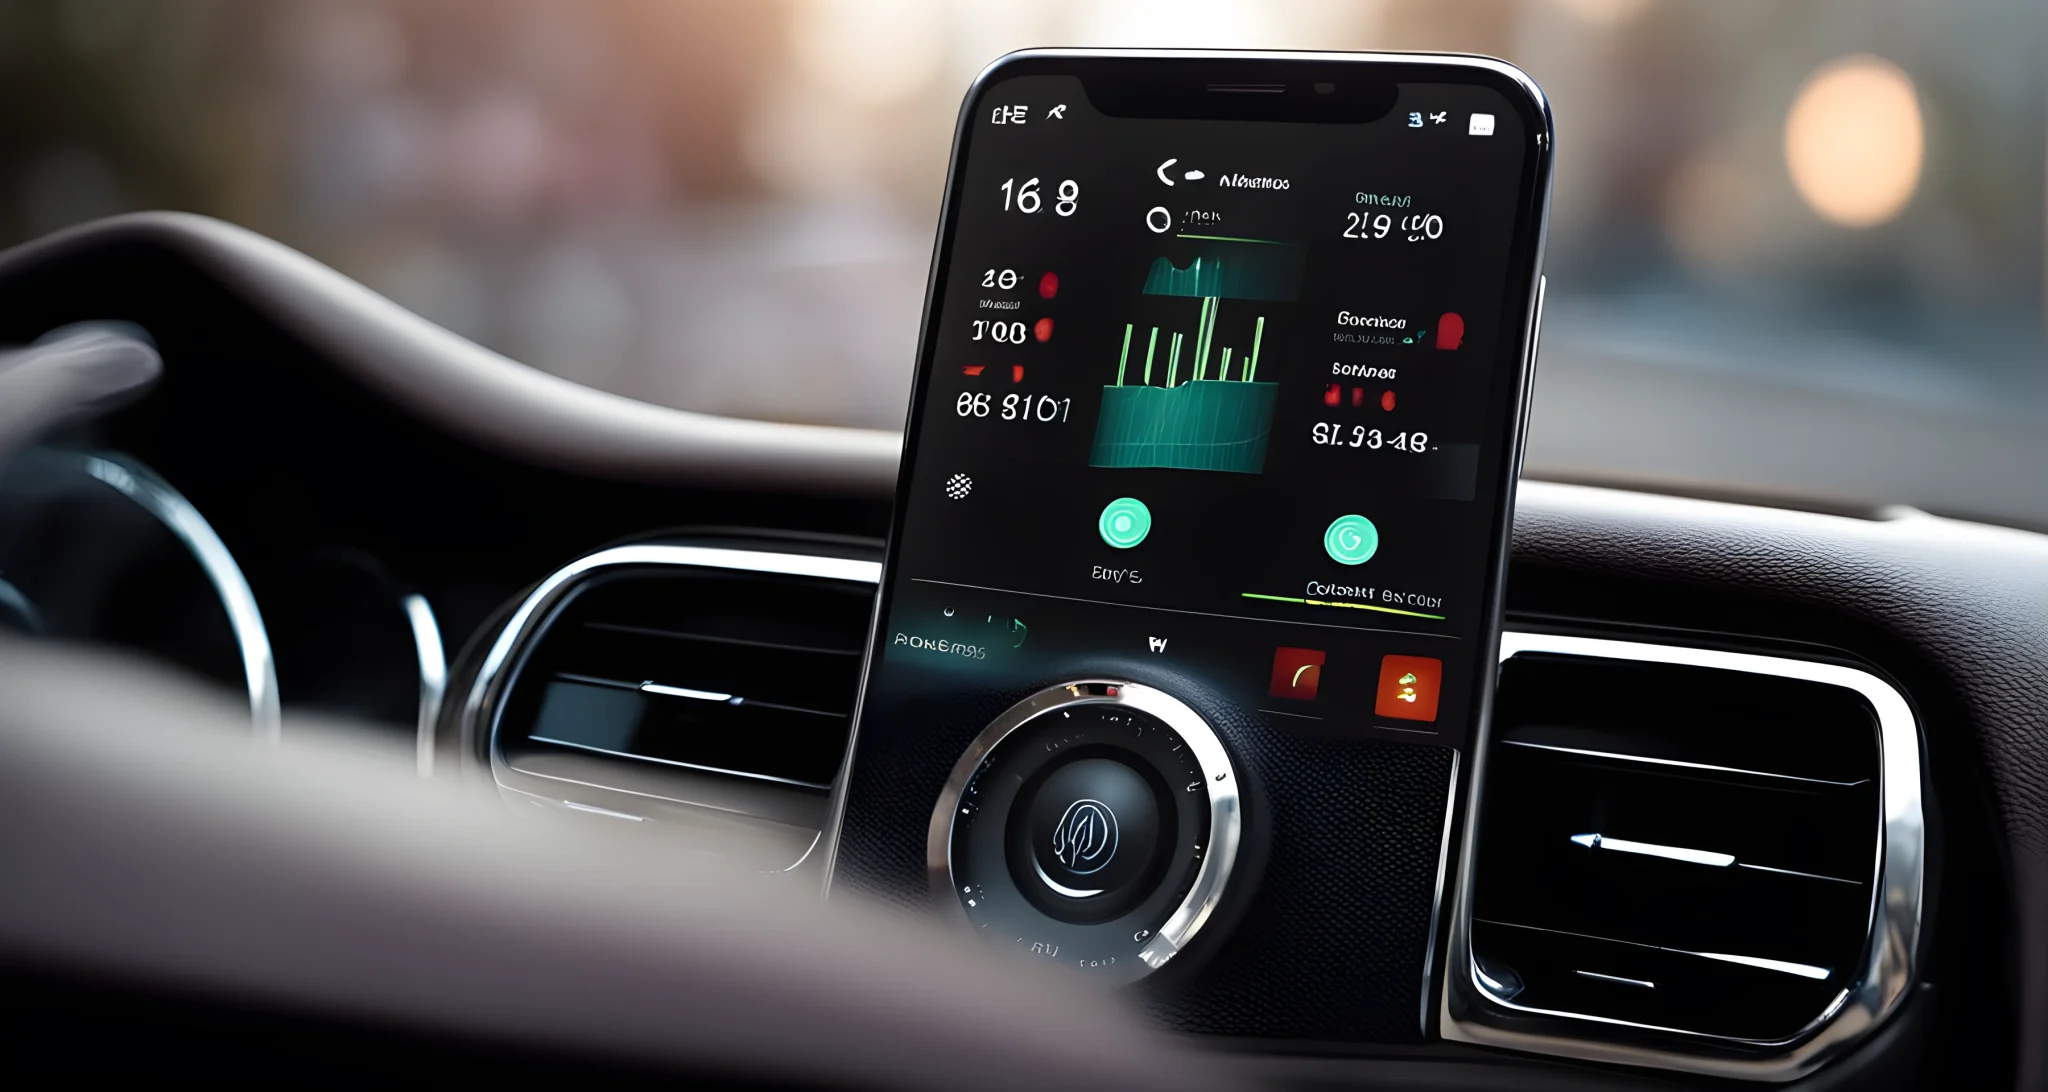 The image shows a smartphone connected to a vehicle's dashboard, displaying a customized user interface with navigation, music, and voice commands.